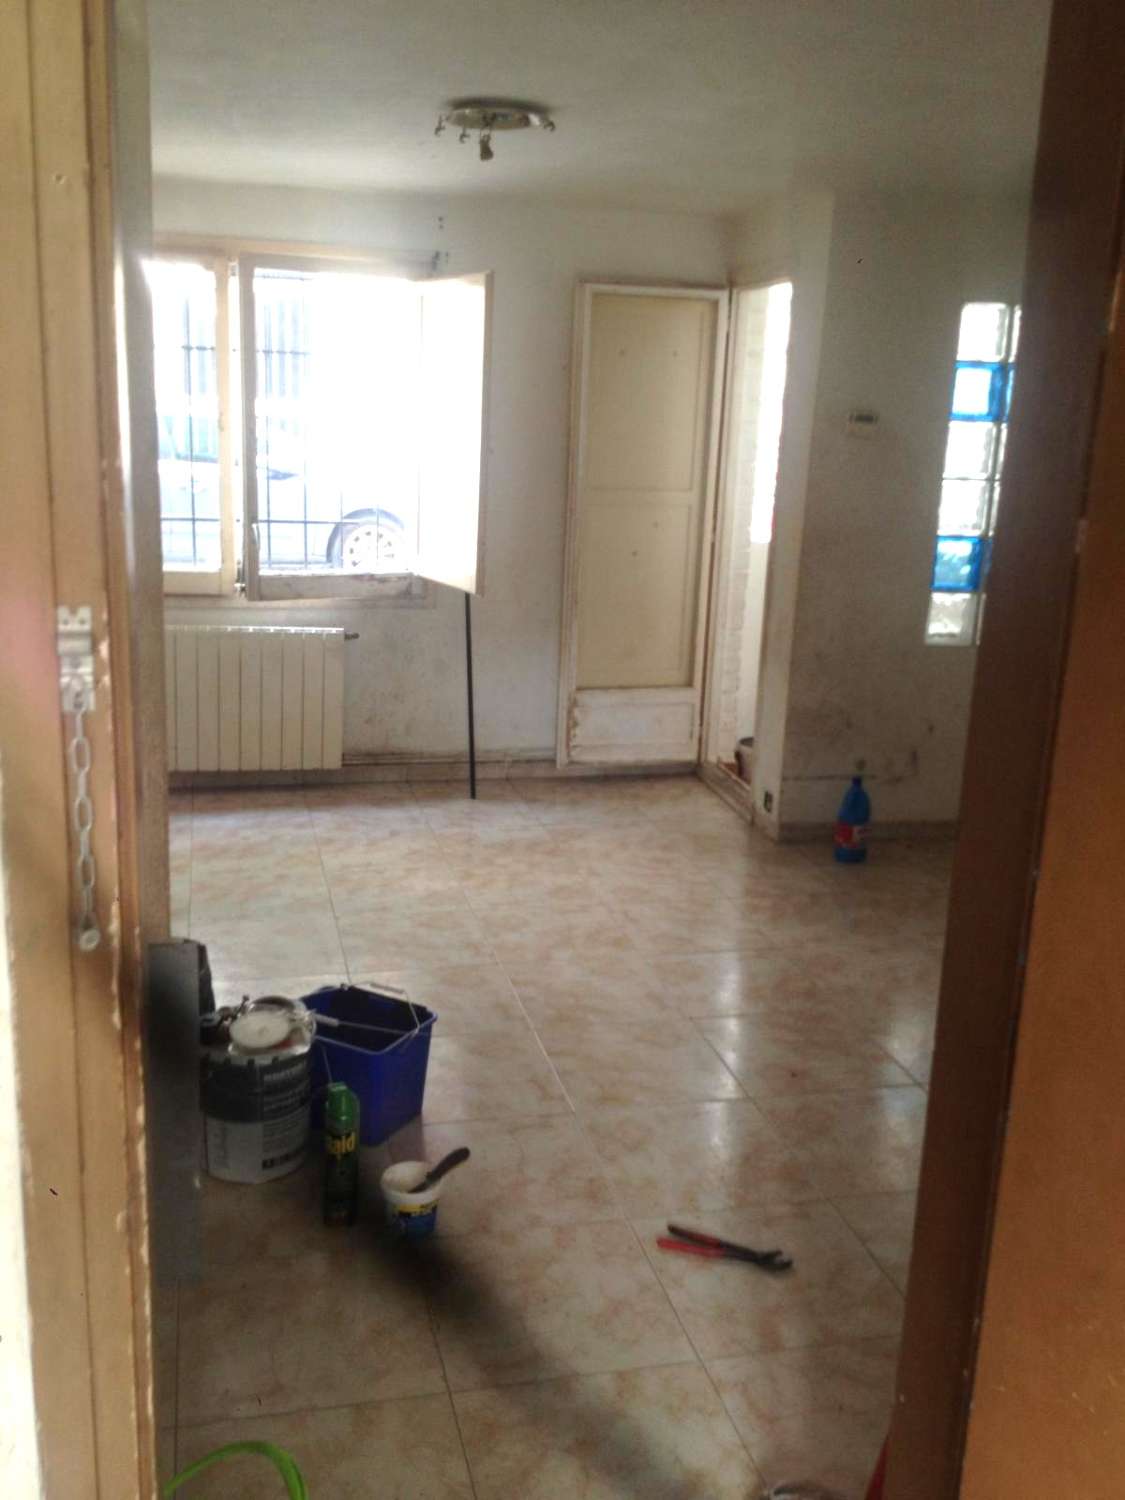 I am selling a 2-bedroom apartment in Sant Celoni